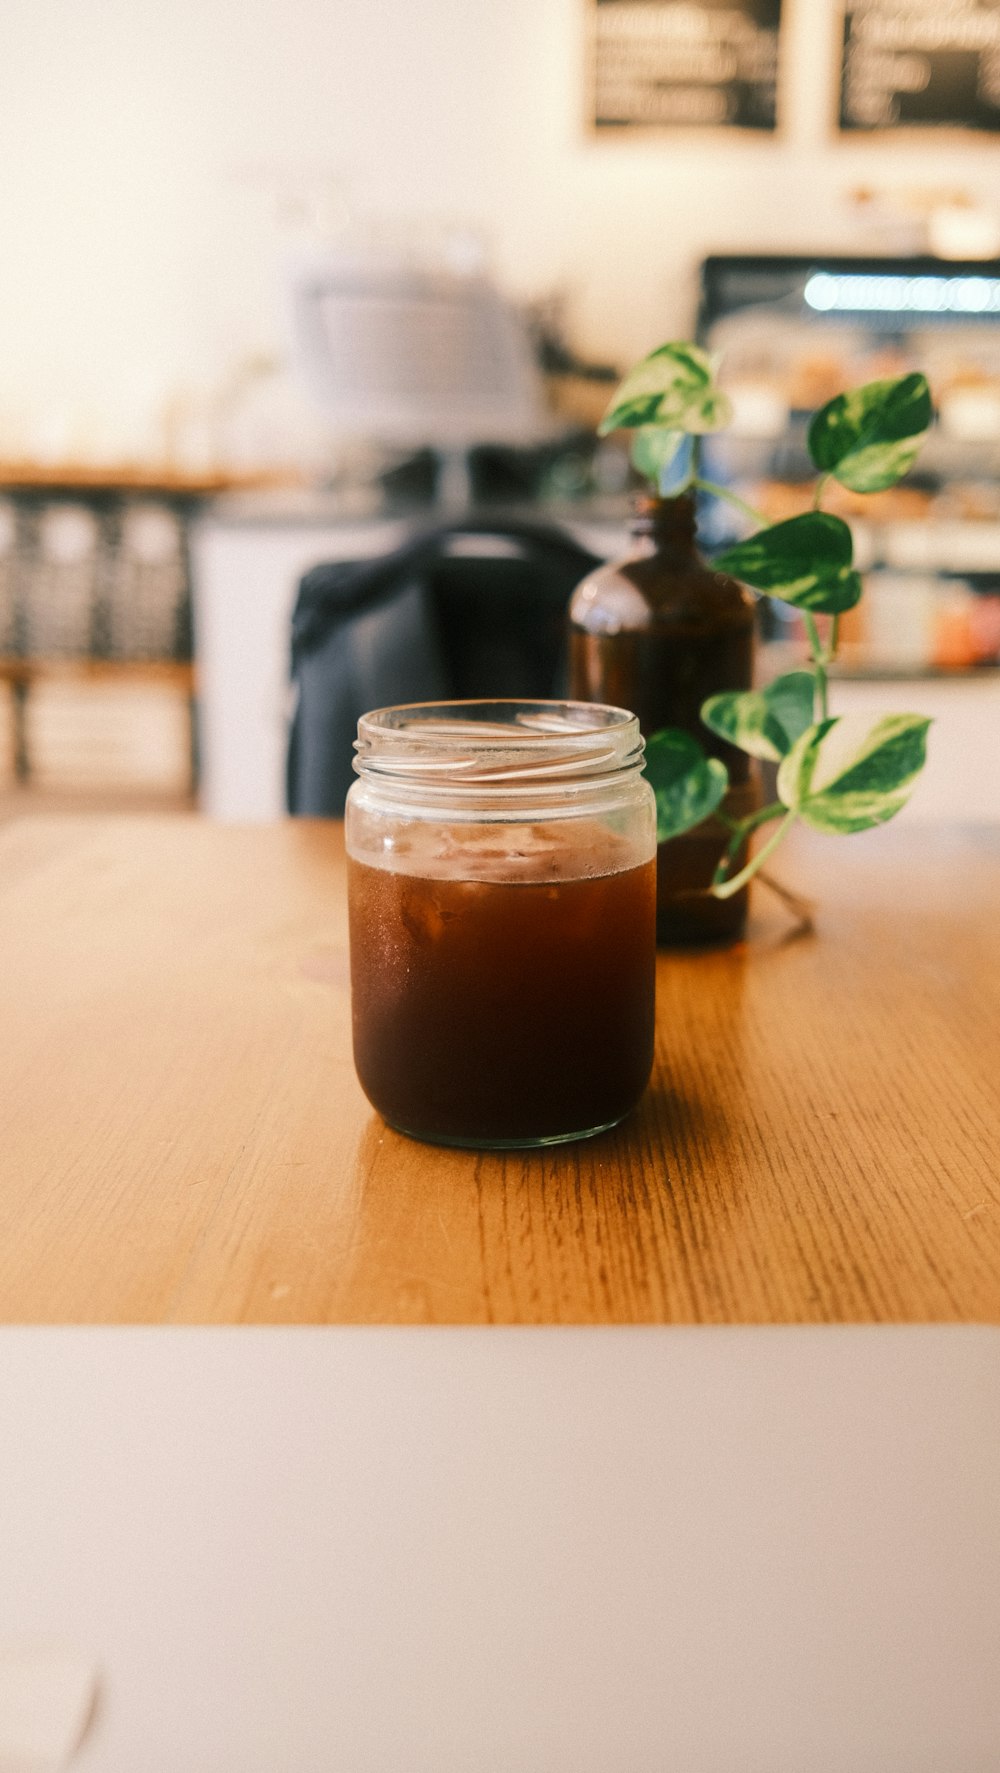 a jar of liquid sitting on top of a wooden table